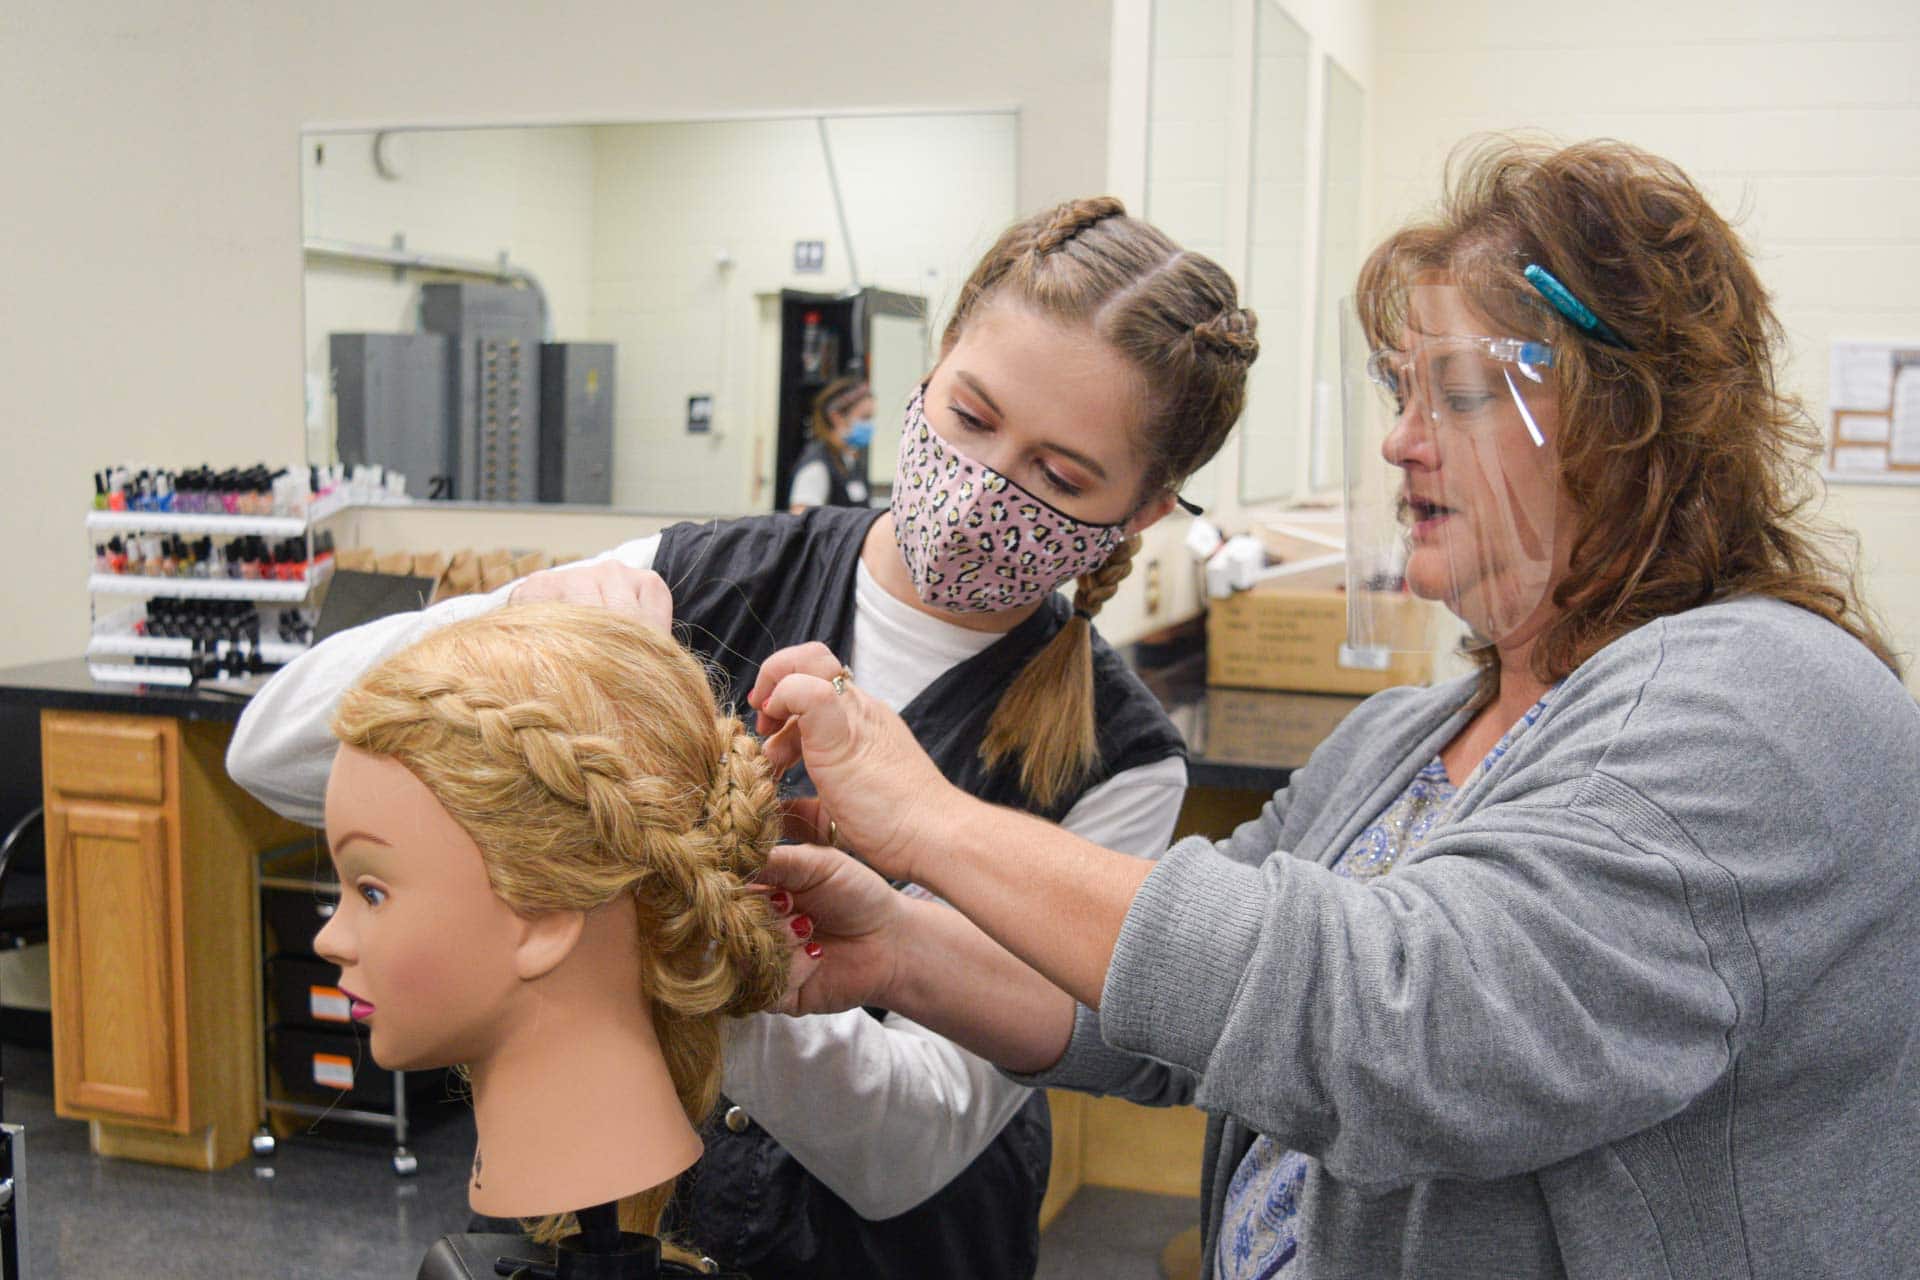 Kaylee Halterman, a cosmetology student at the Fred Eberle Technology Center, works on braiding as instructor Crystal Moss looks on. The cosmetology program at FETC is currently taking applications for the next class, which begins around August and takes approximately 14 months to complete.